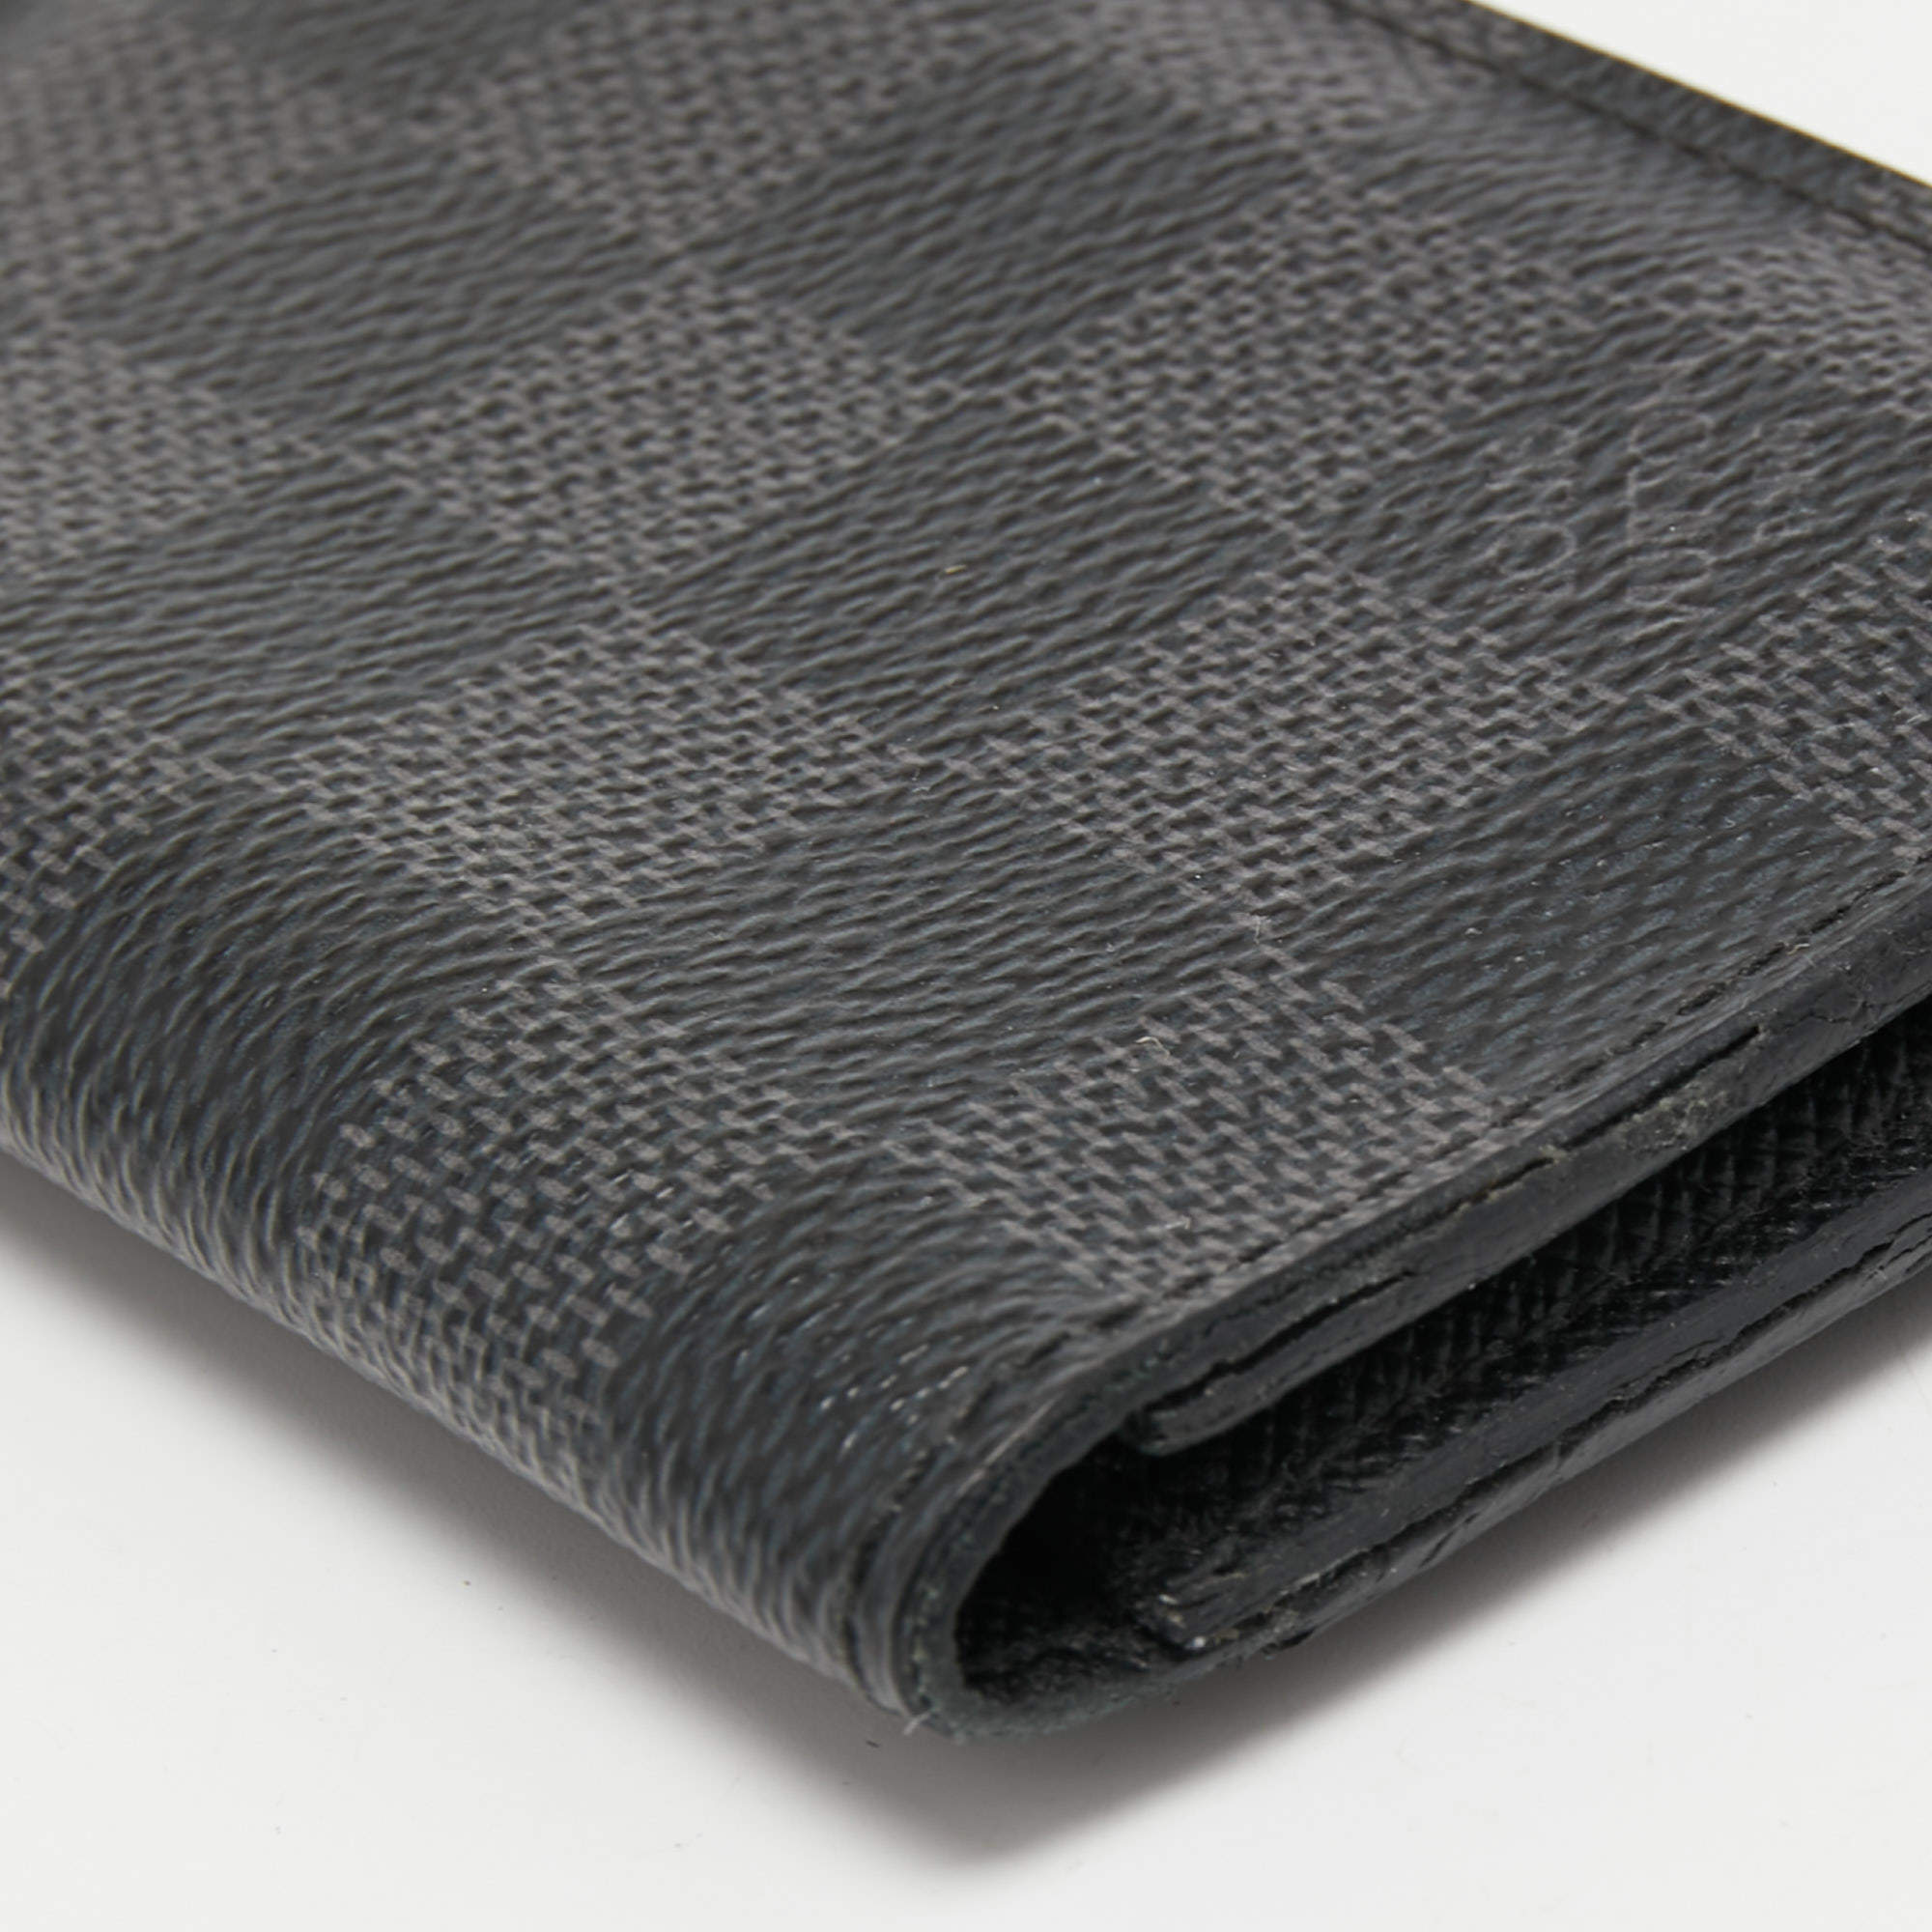 Takeoff Pouch Damier Graphite Canvas - Wallets and Small Leather Goods  N40505